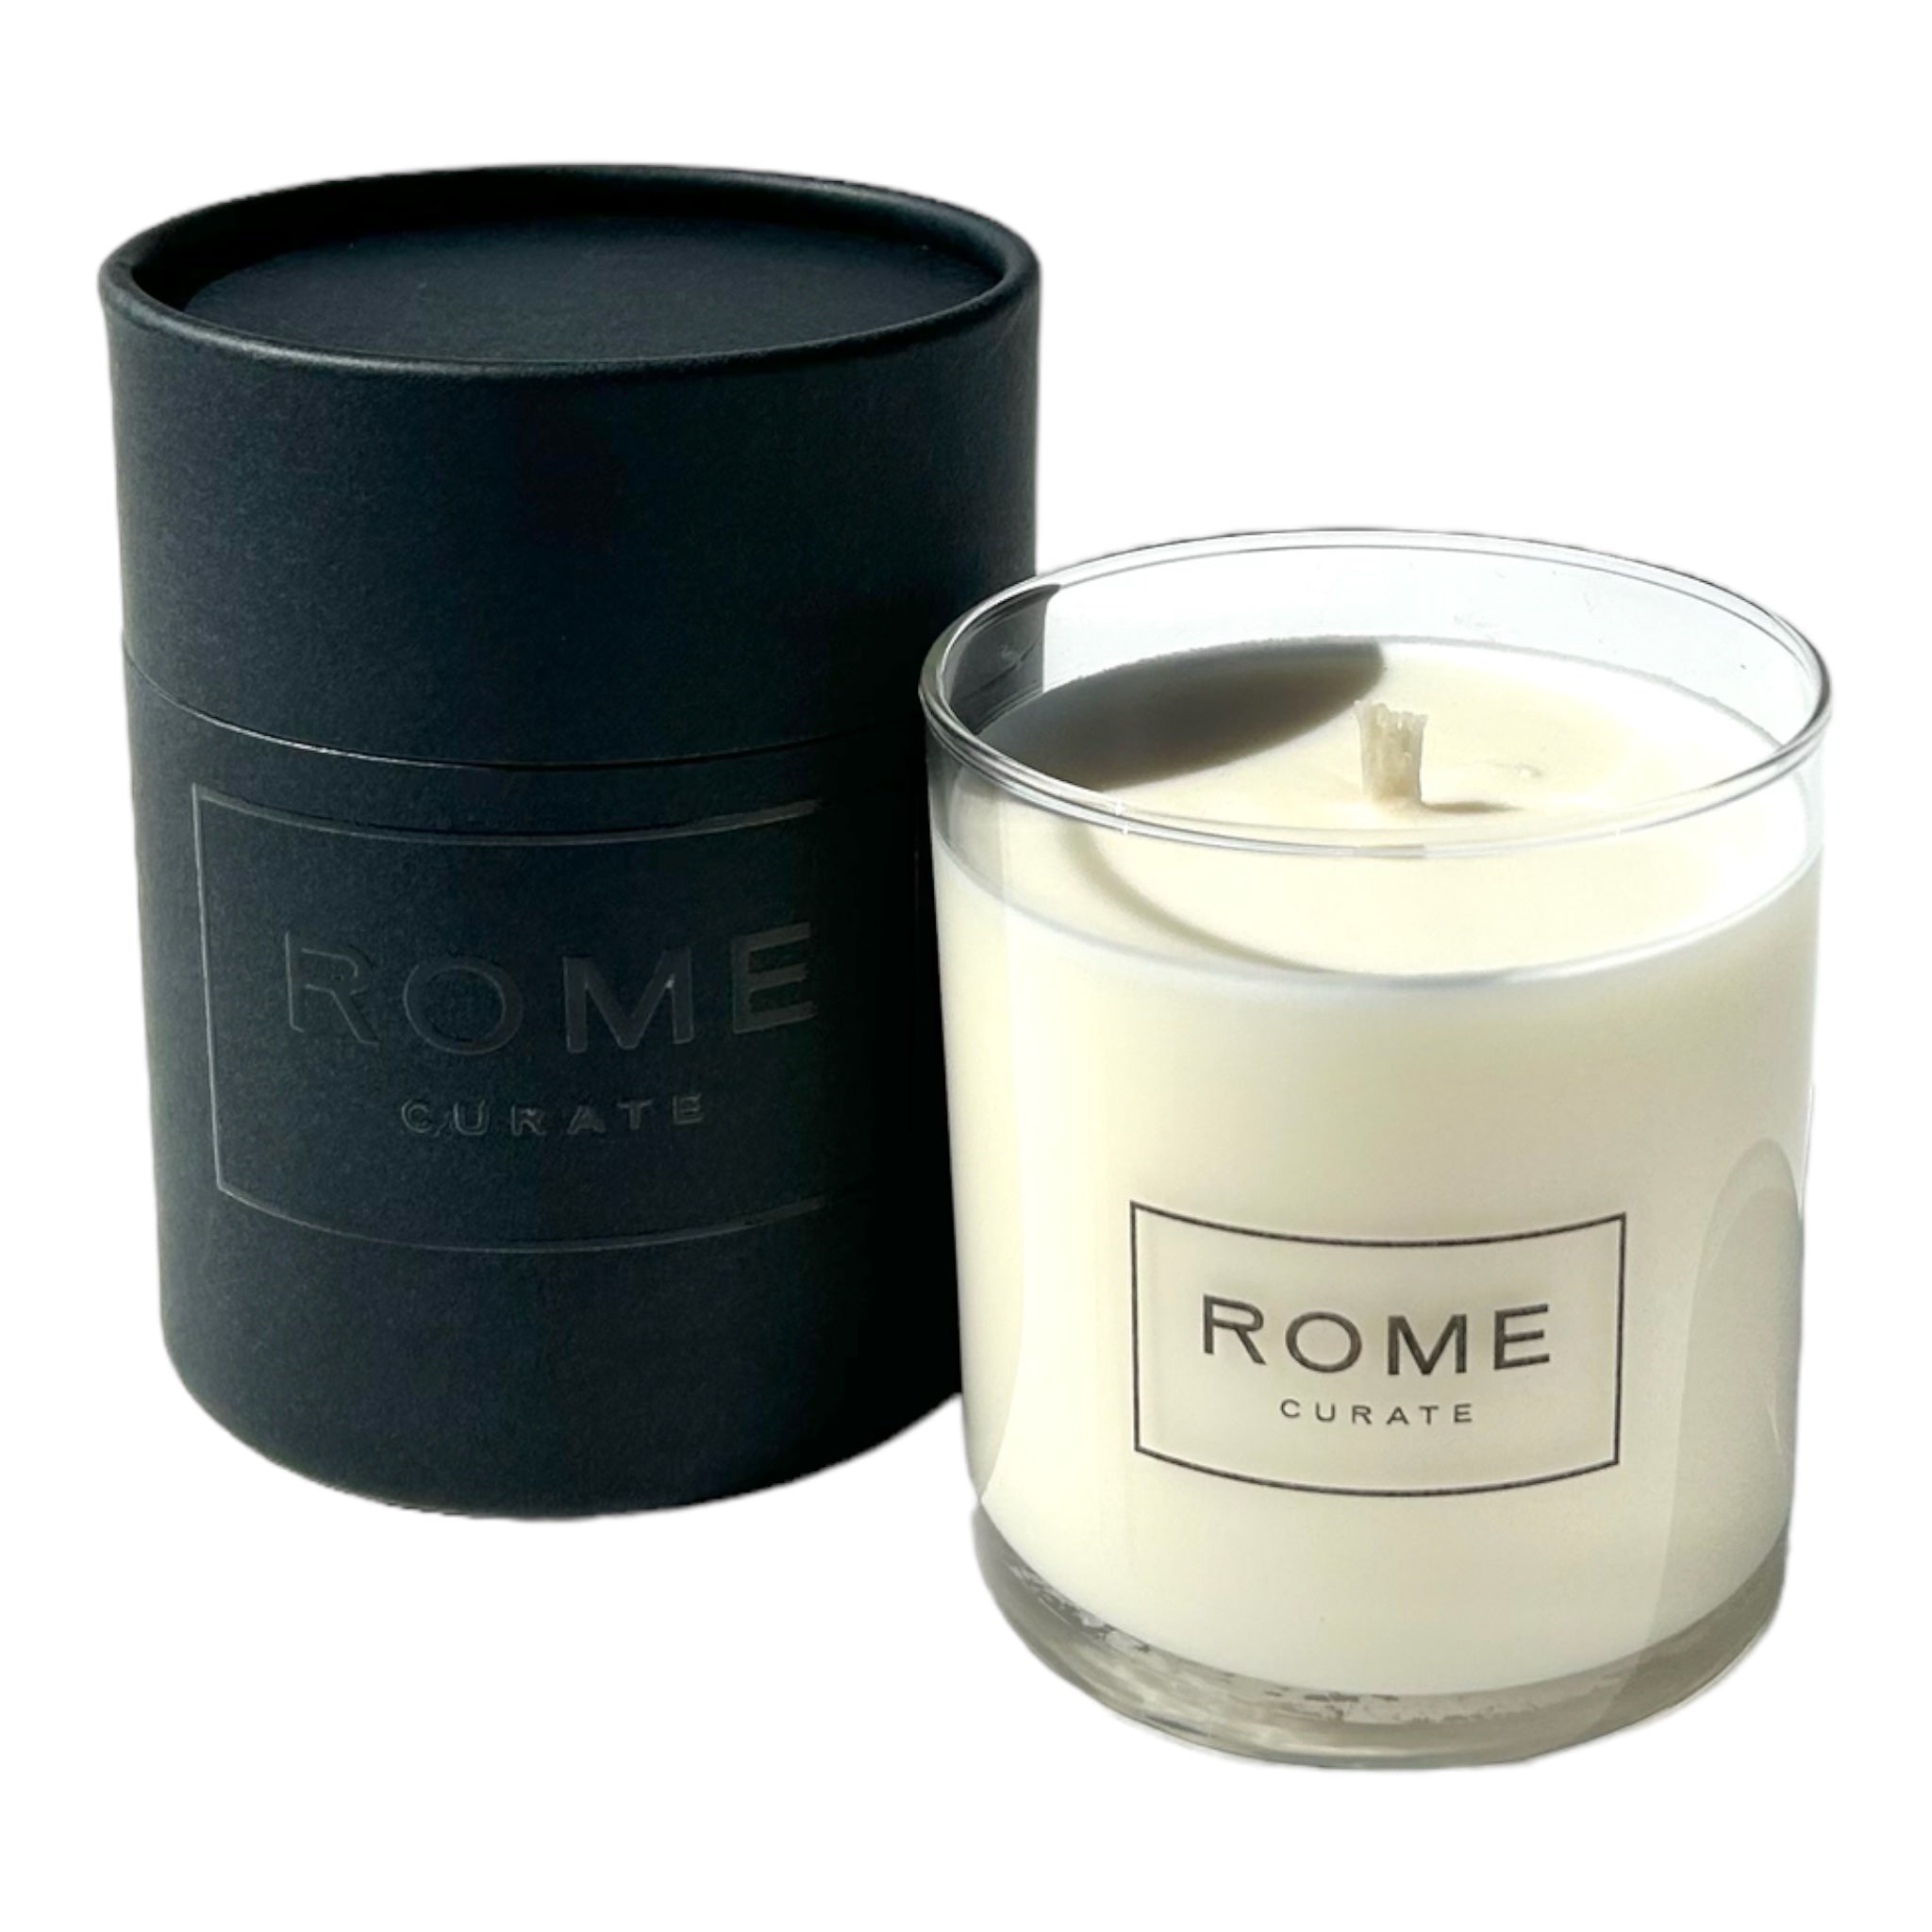 The monterey is a herbal, piney, evergreen and fruity scented soy candle